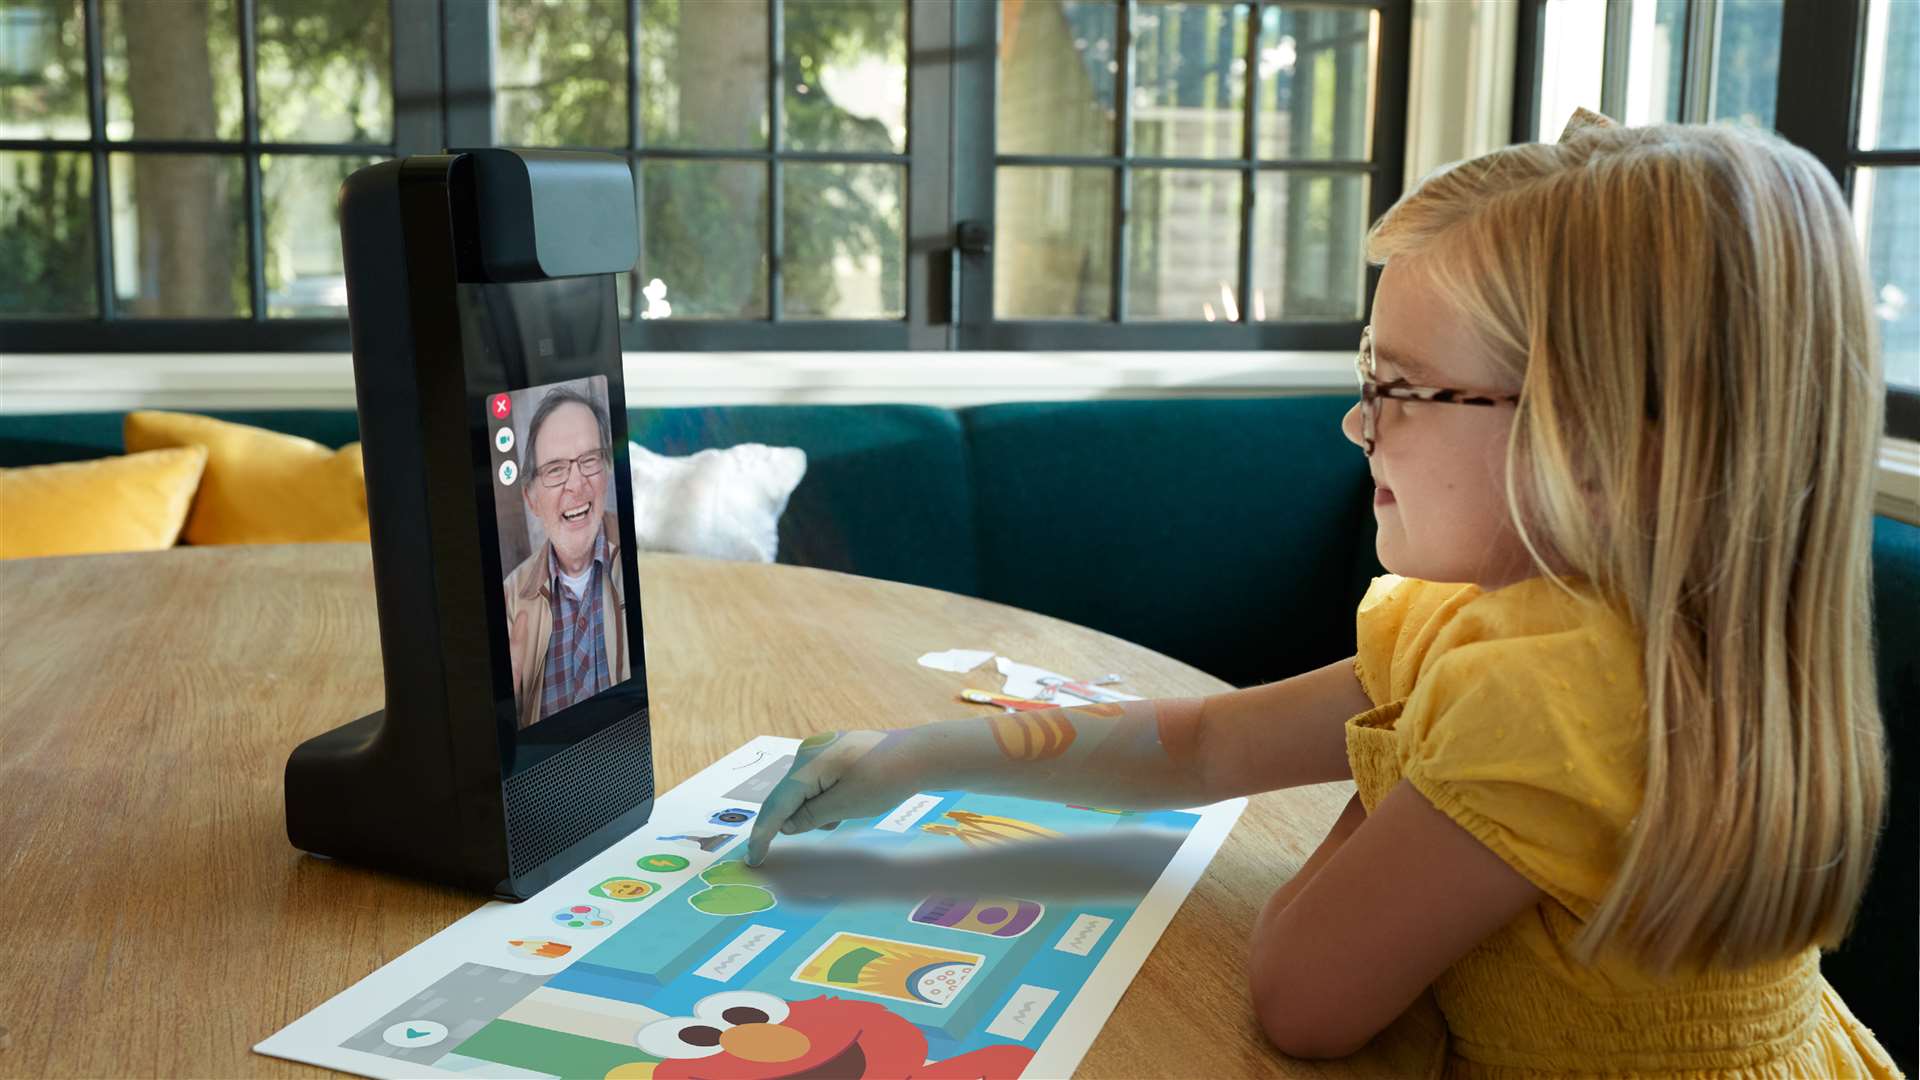 The Amazon Glow includes projected tabletop activities for children to do while on calls with family (Amazon/PA)